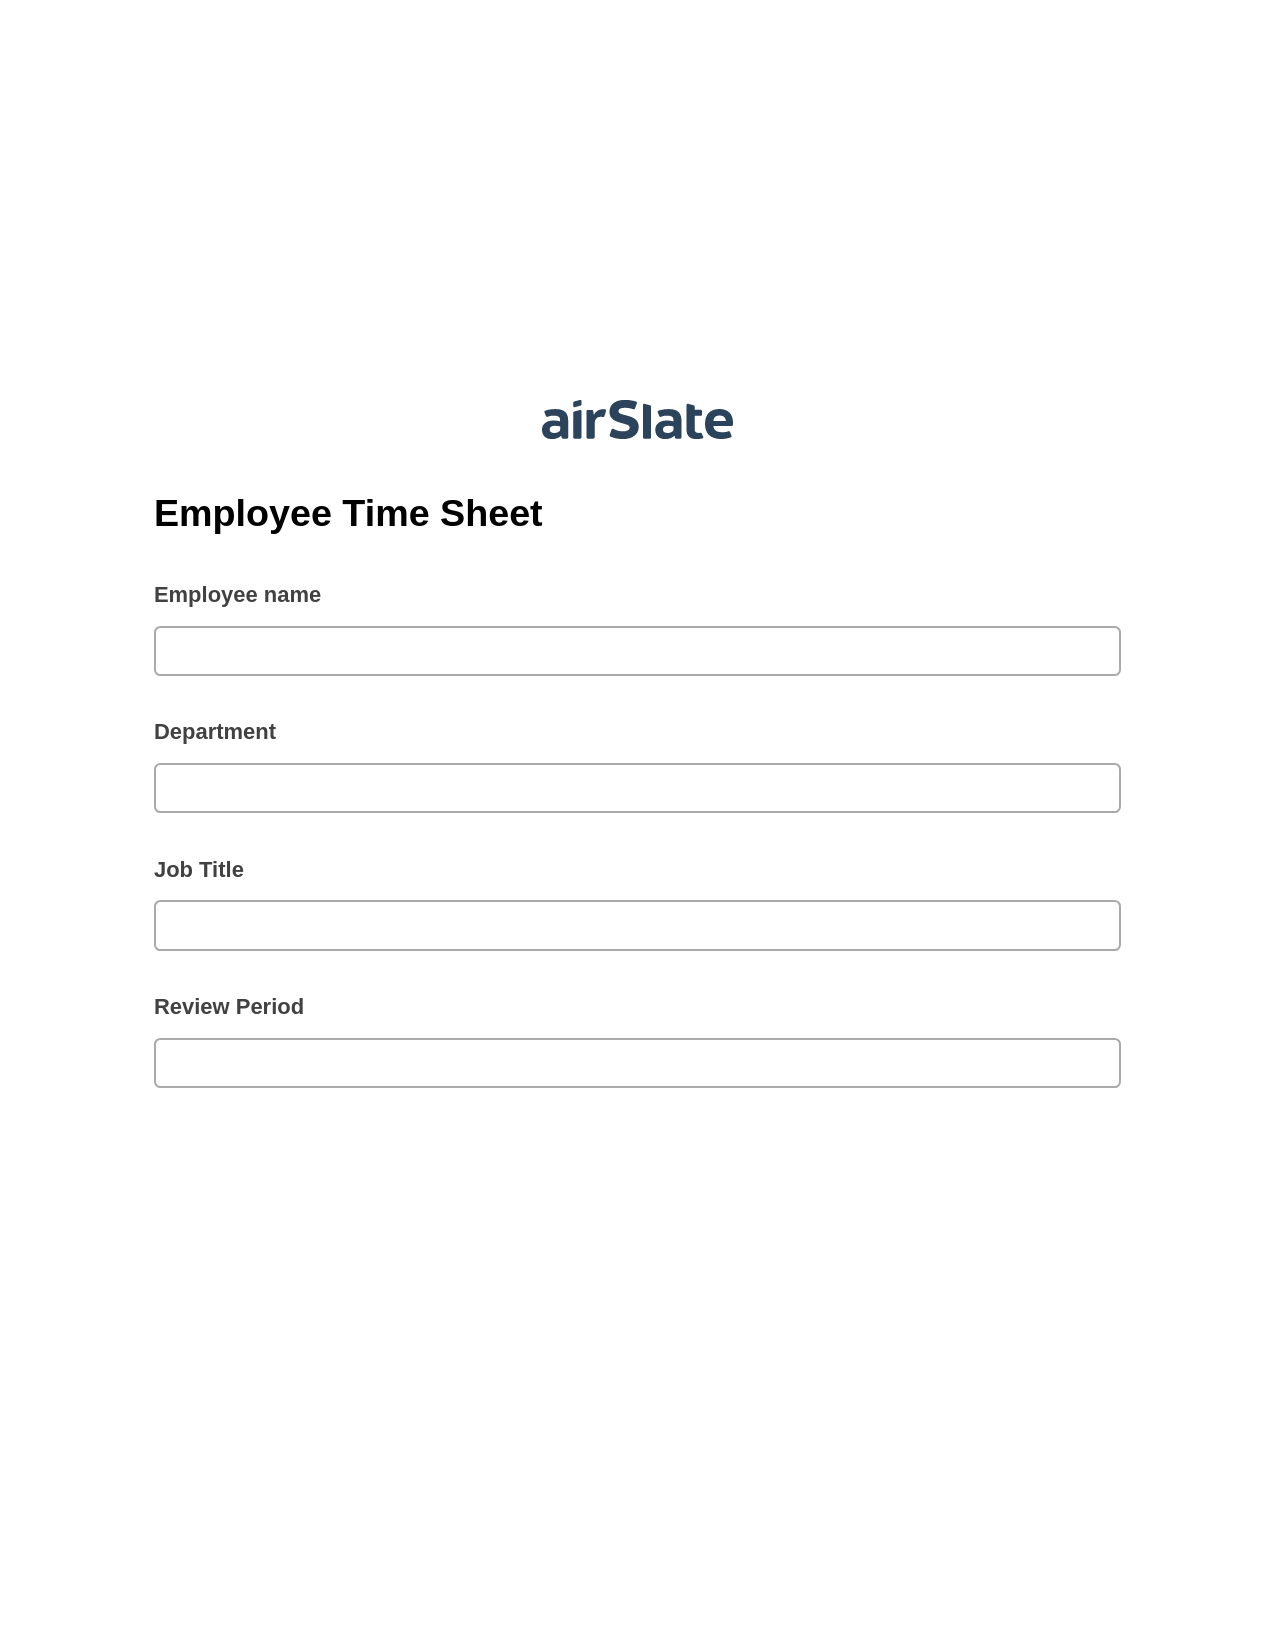 Multirole Employee Time Sheet Pre-fill from MS Dynamics 365 Records, Create Salesforce Records Bot, Email Notification Postfinish Bot